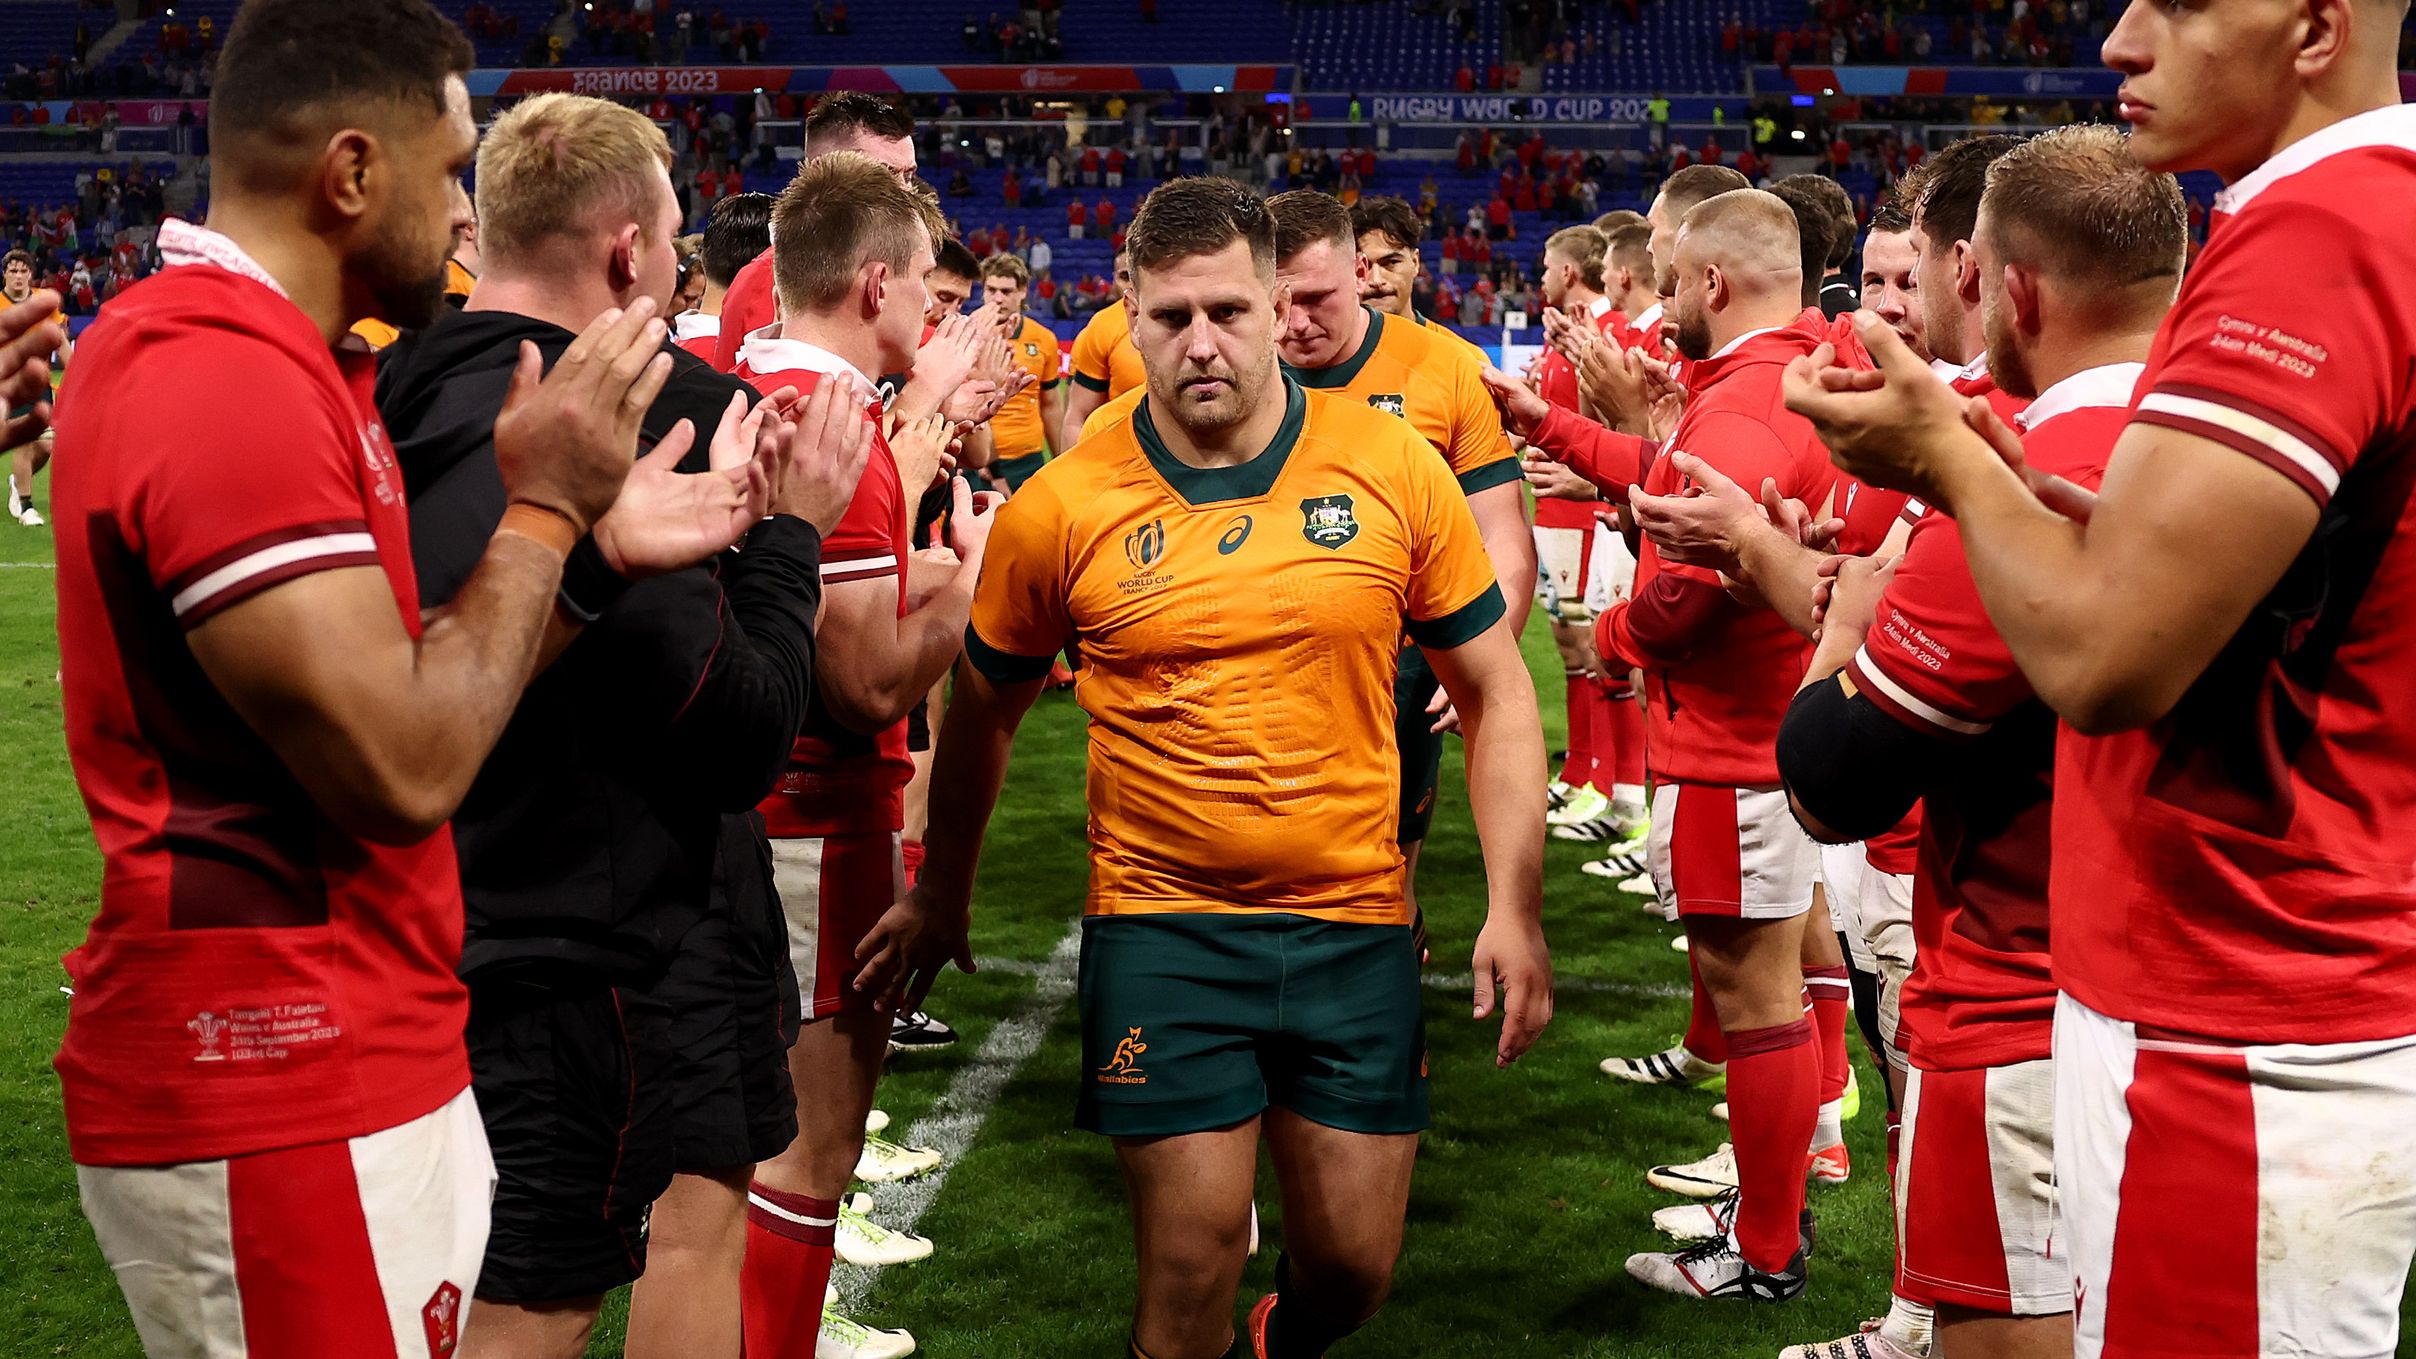 The players of Wales give the players of Australia a guard of honour as they leave the pitch at full-time.